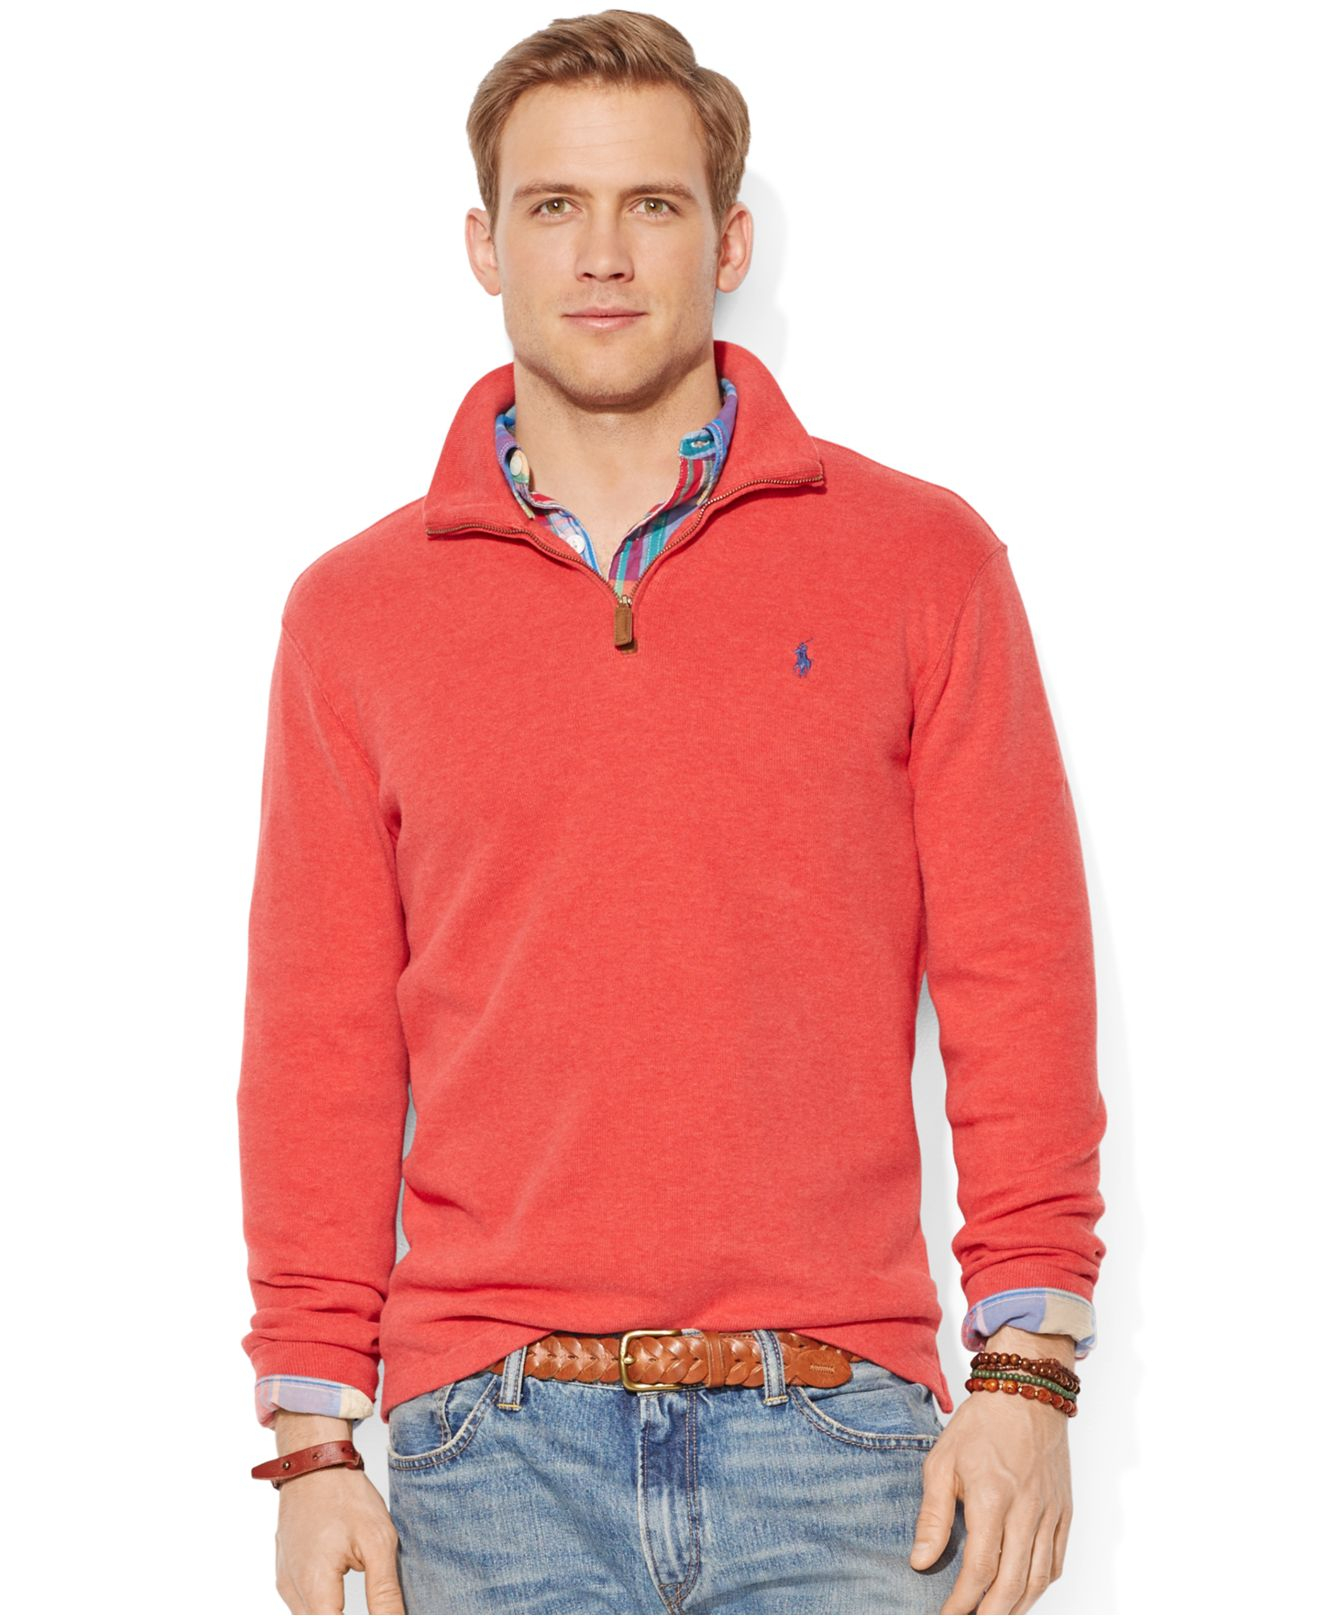 Download Polo Ralph Lauren French-Rib Half-Zip Pullover Sweater in ...